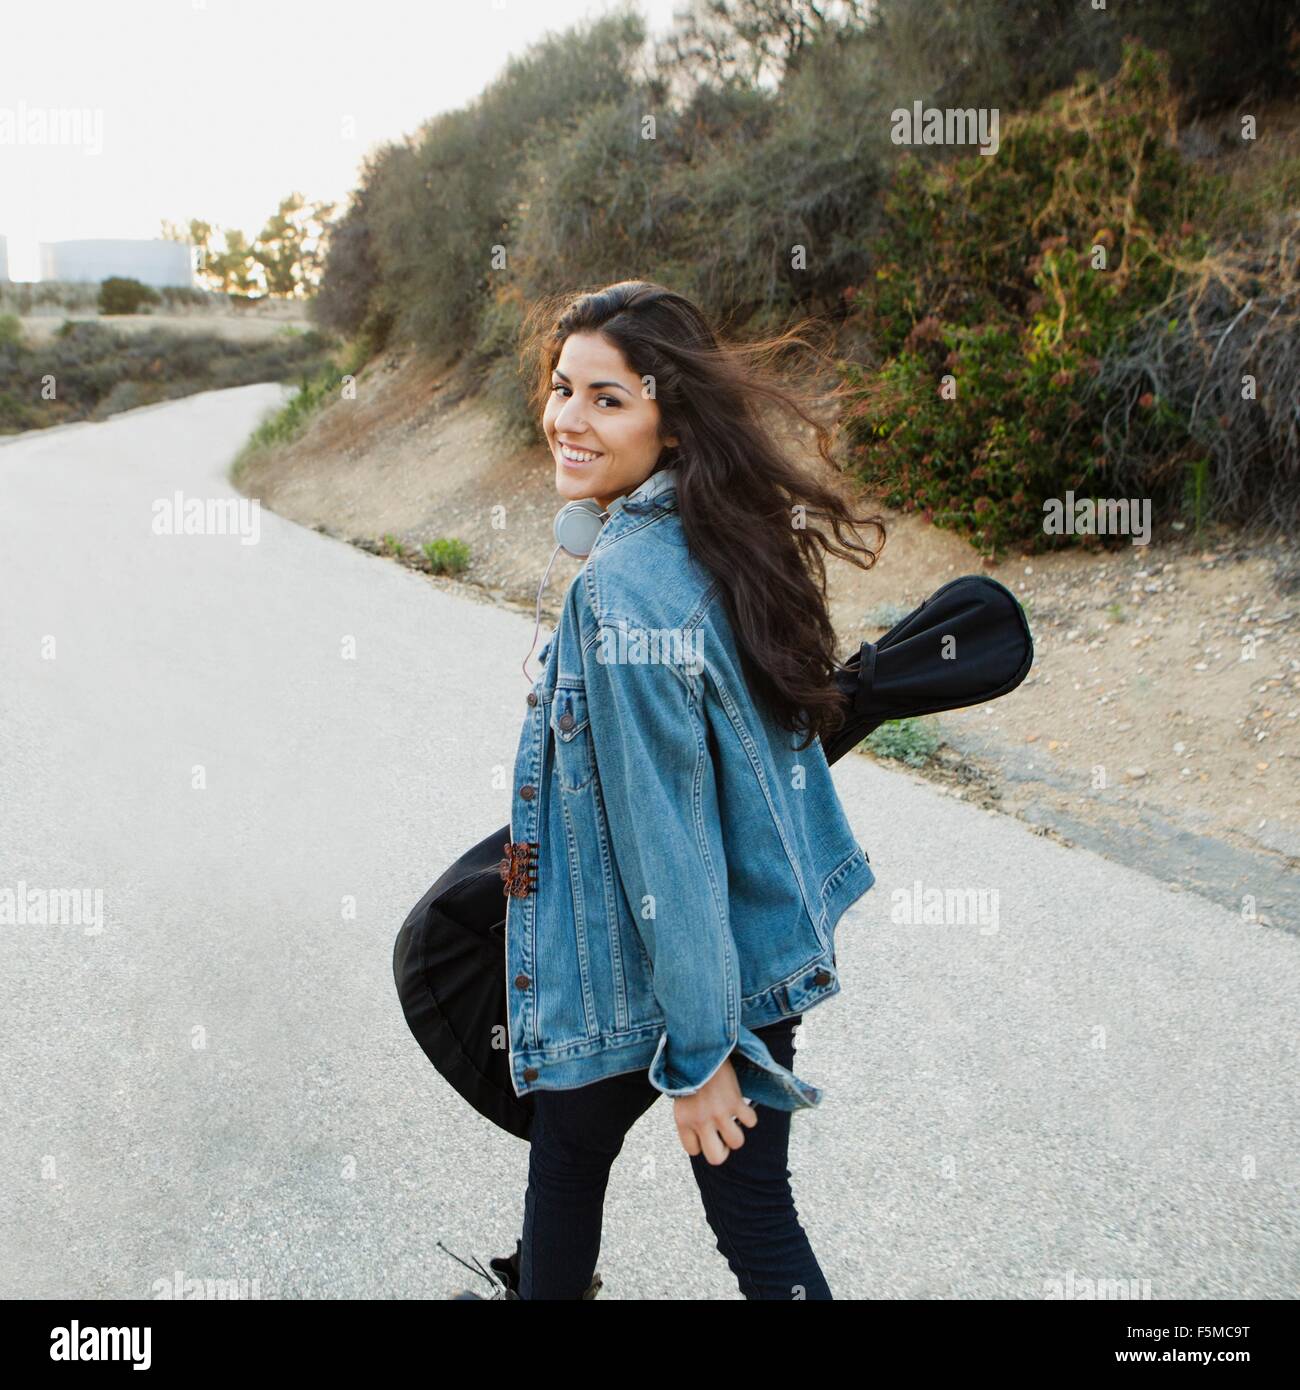 Young woman carrying guitar looking over shoulder at camera smiling, Woodland Hills, California, USA Stock Photo